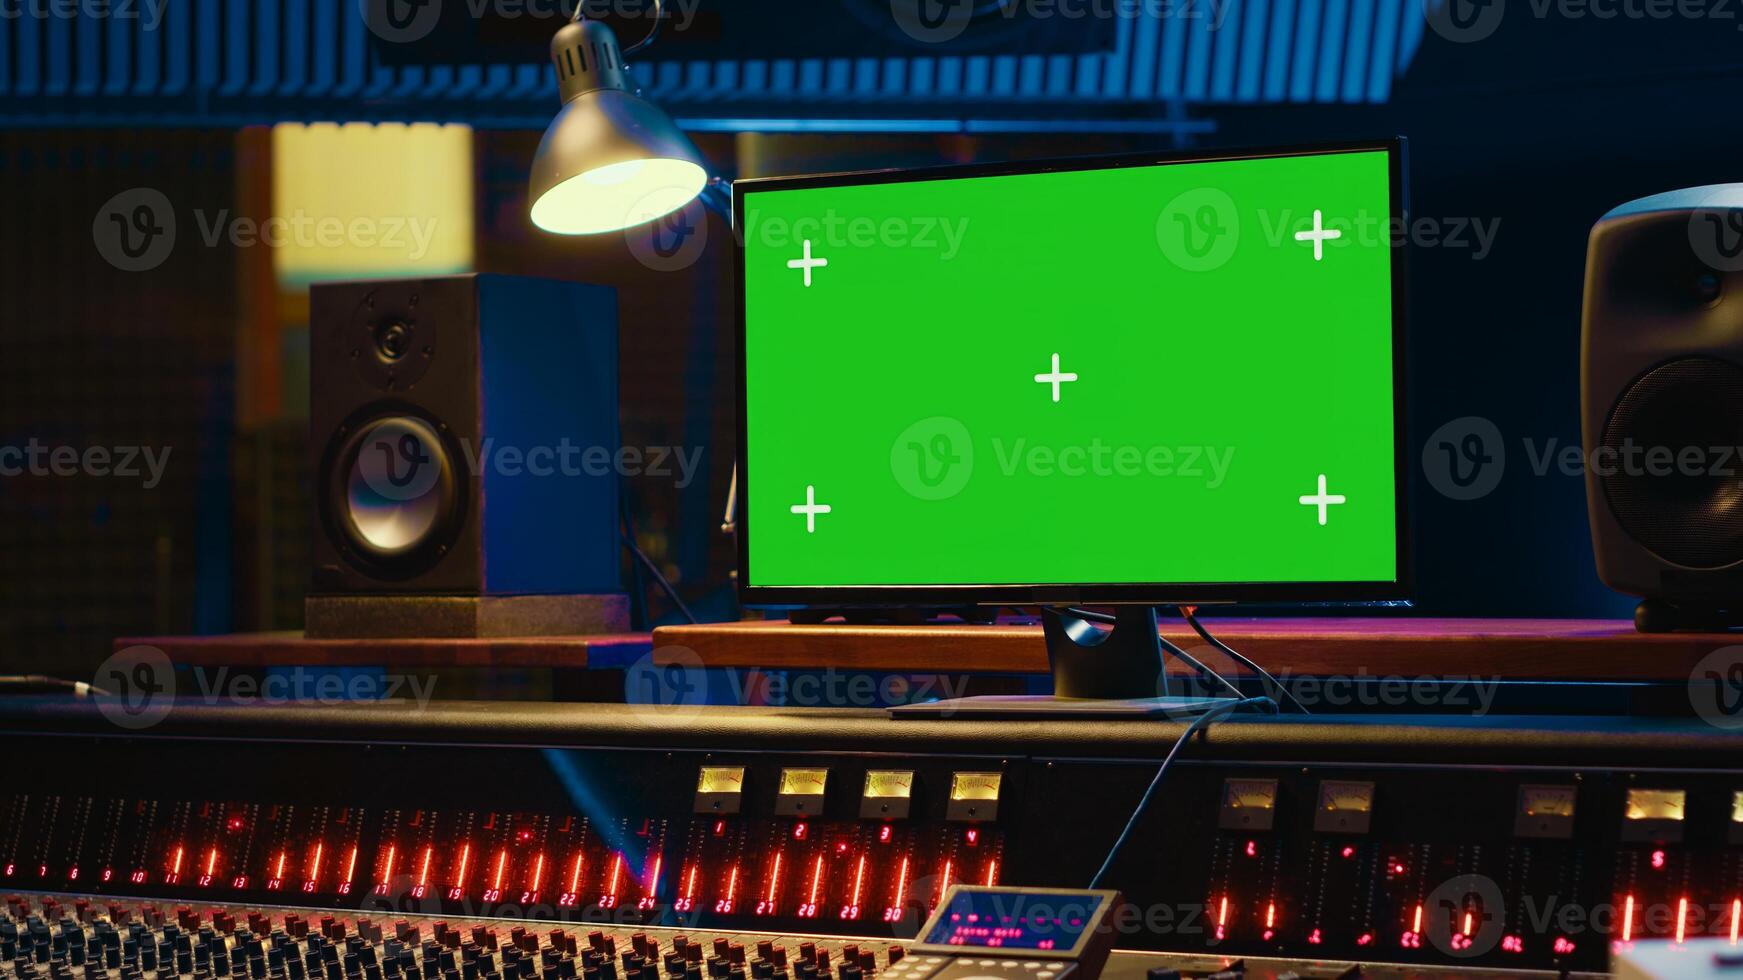 Empty professional recording studio control room with greenscreen on display, editing and processing tracks. Motorized faders, buttons and sliders operated for mix and master techniques. Camera A. photo